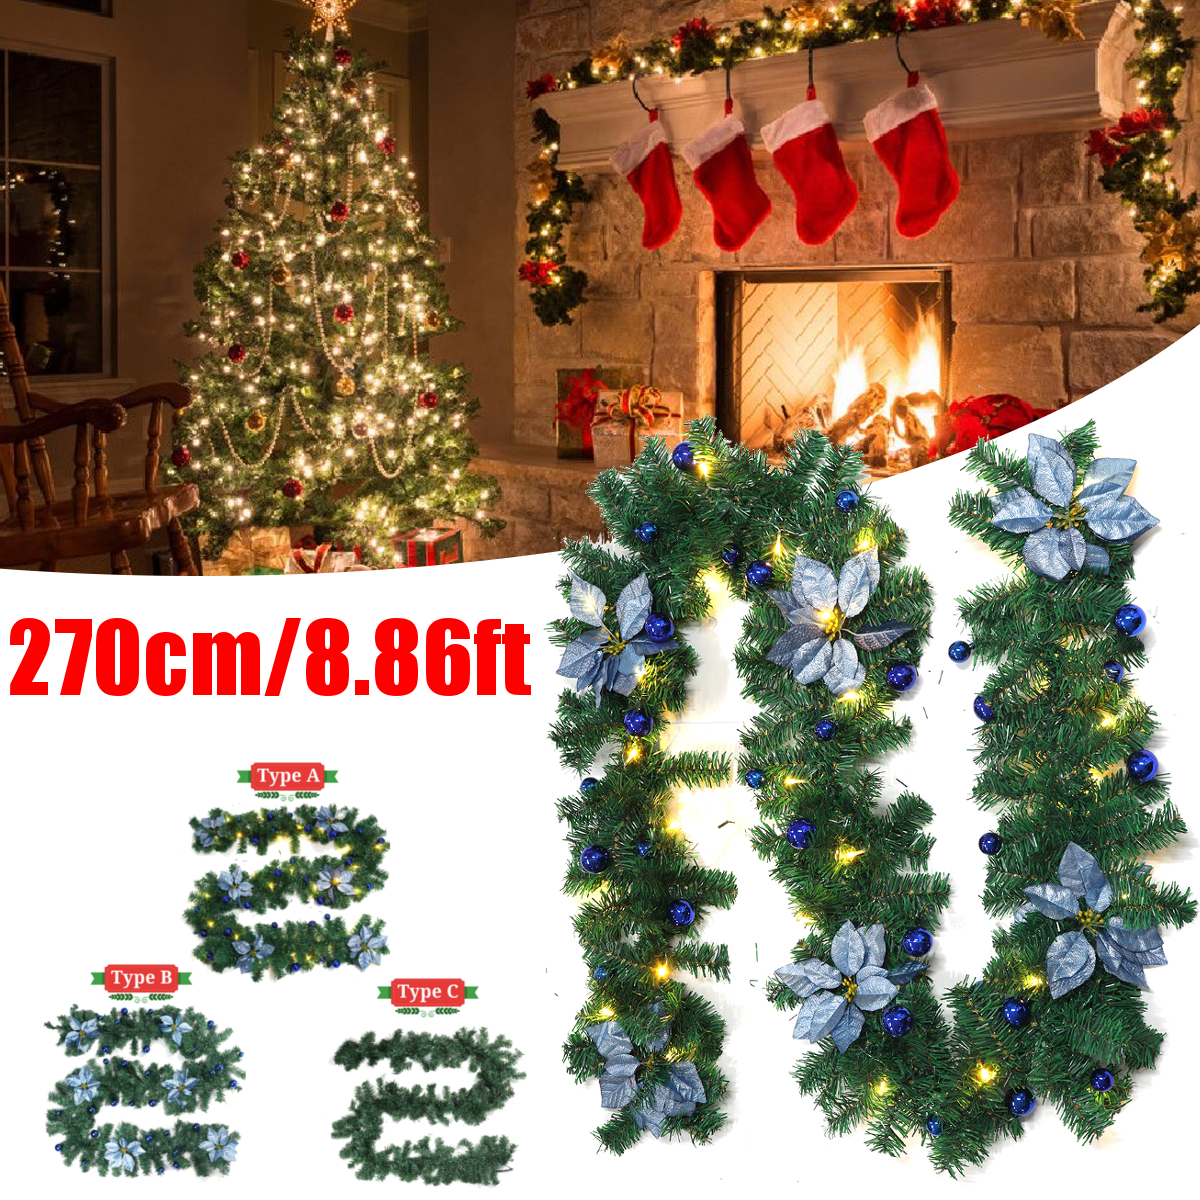 27m-Christmas-Garland-Colorful-Fireplaces-Stairs-LED-Decorated-Garlands-Decor-1821550-1